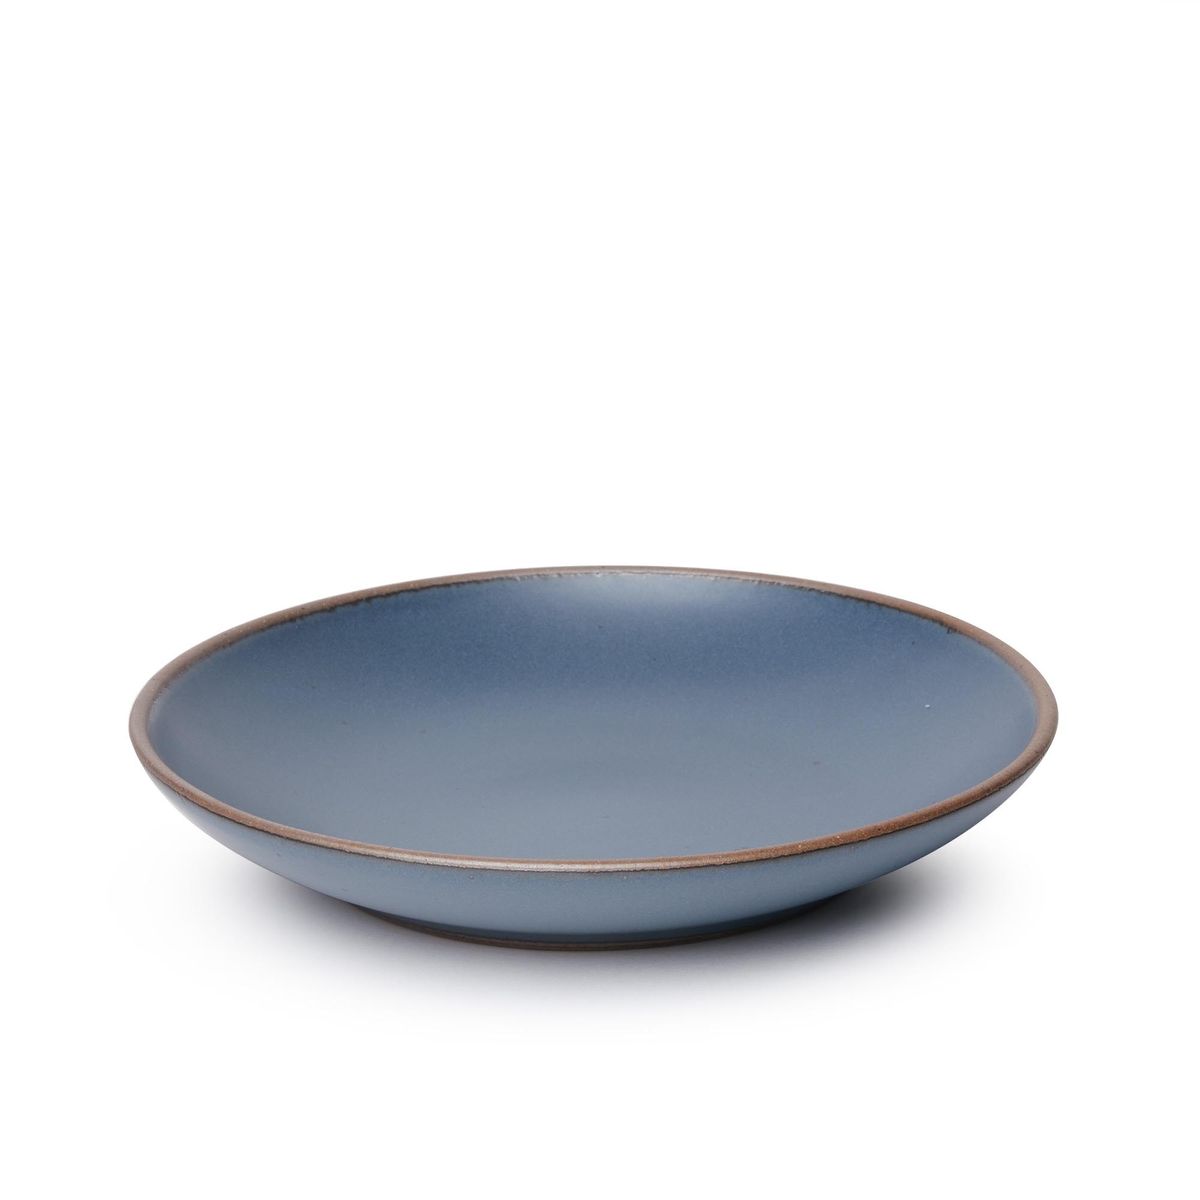 A large ceramic plate with a curved bowl edge in a toned-down navy color featuring iron speckles and an unglazed rim.